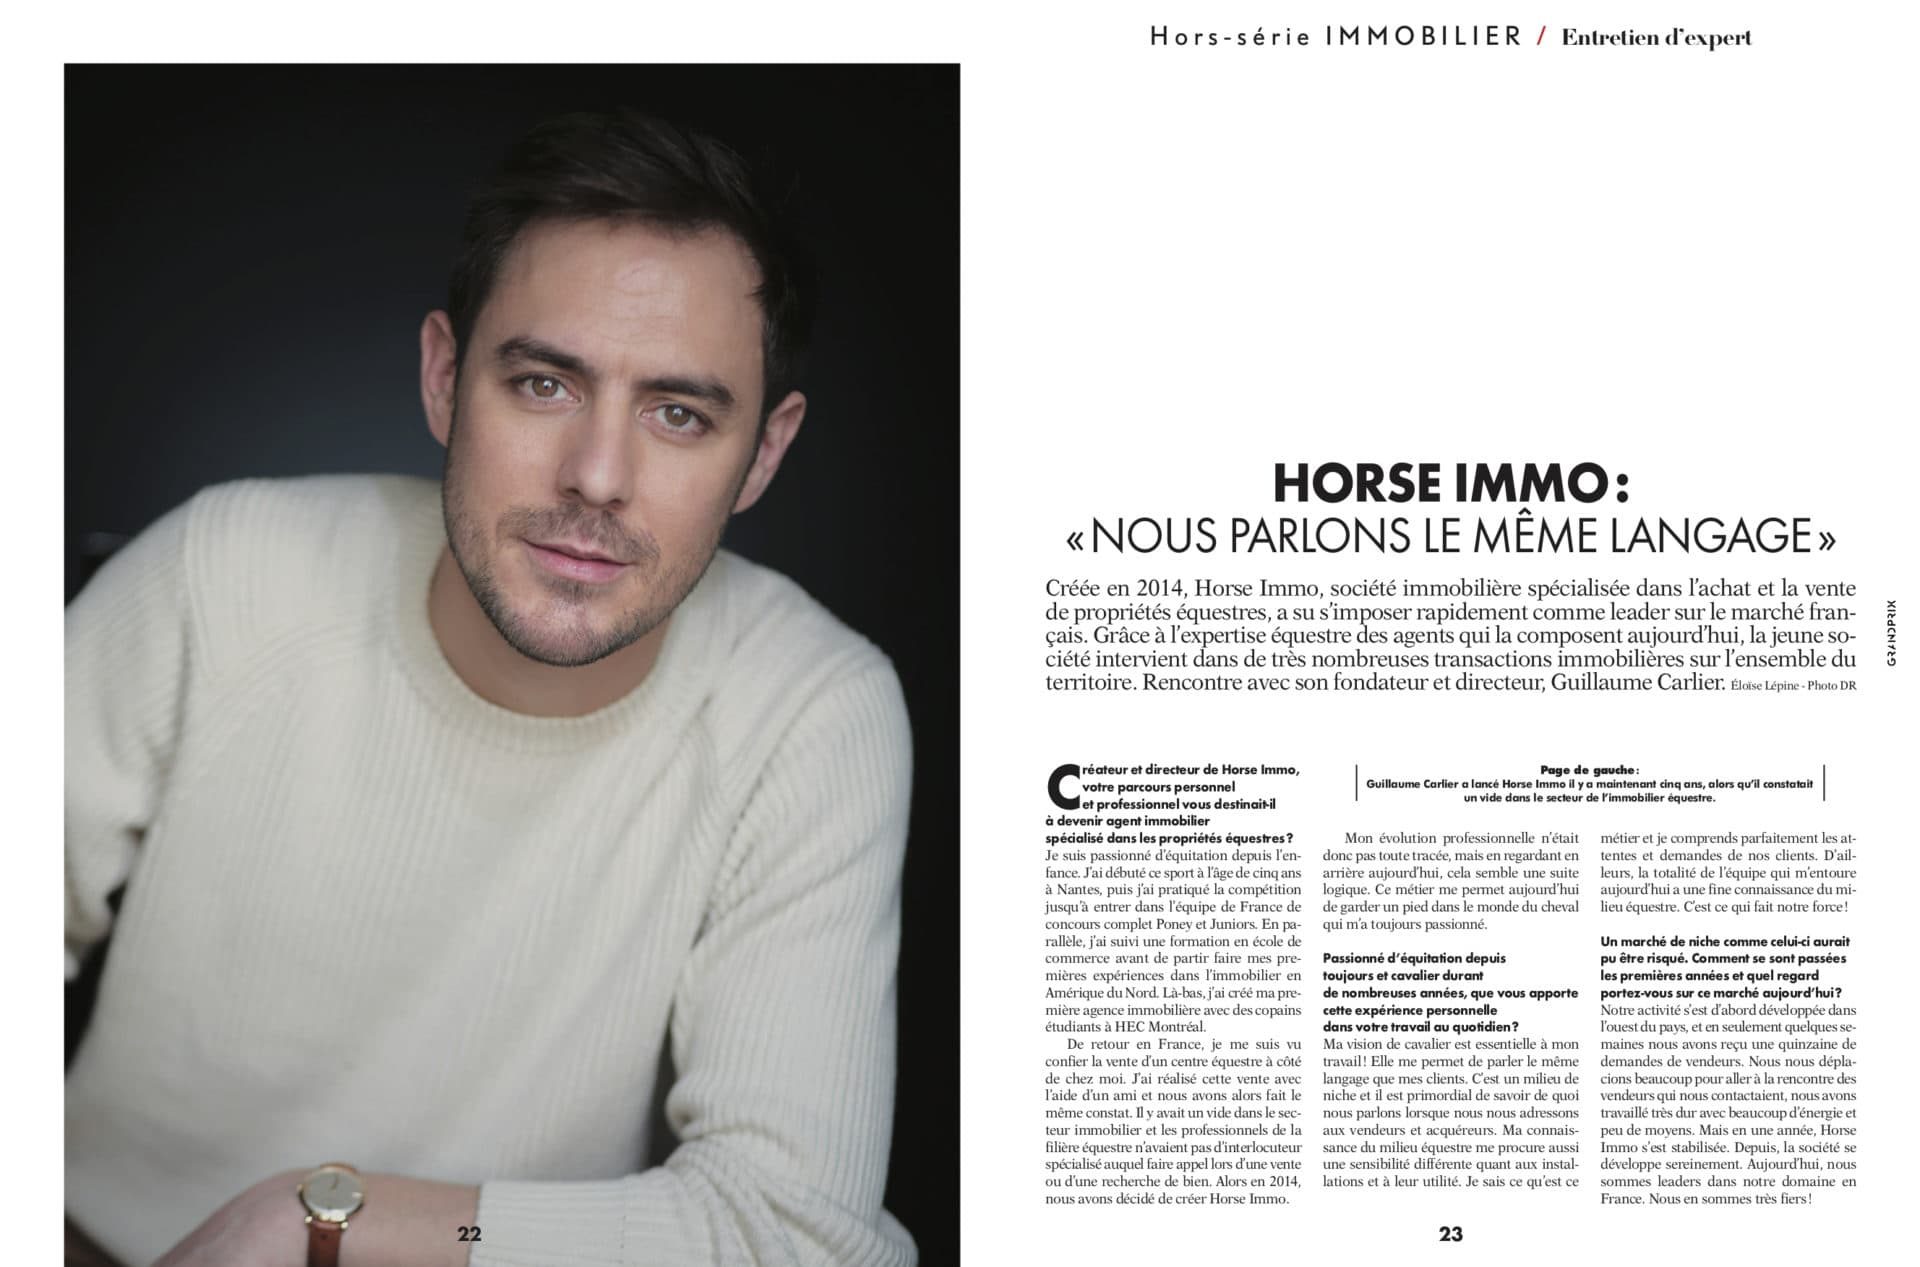 Horse Immo 1920x1267 1920x1267 - Hors Série Immobilier Grand Prix Magazine - Interview